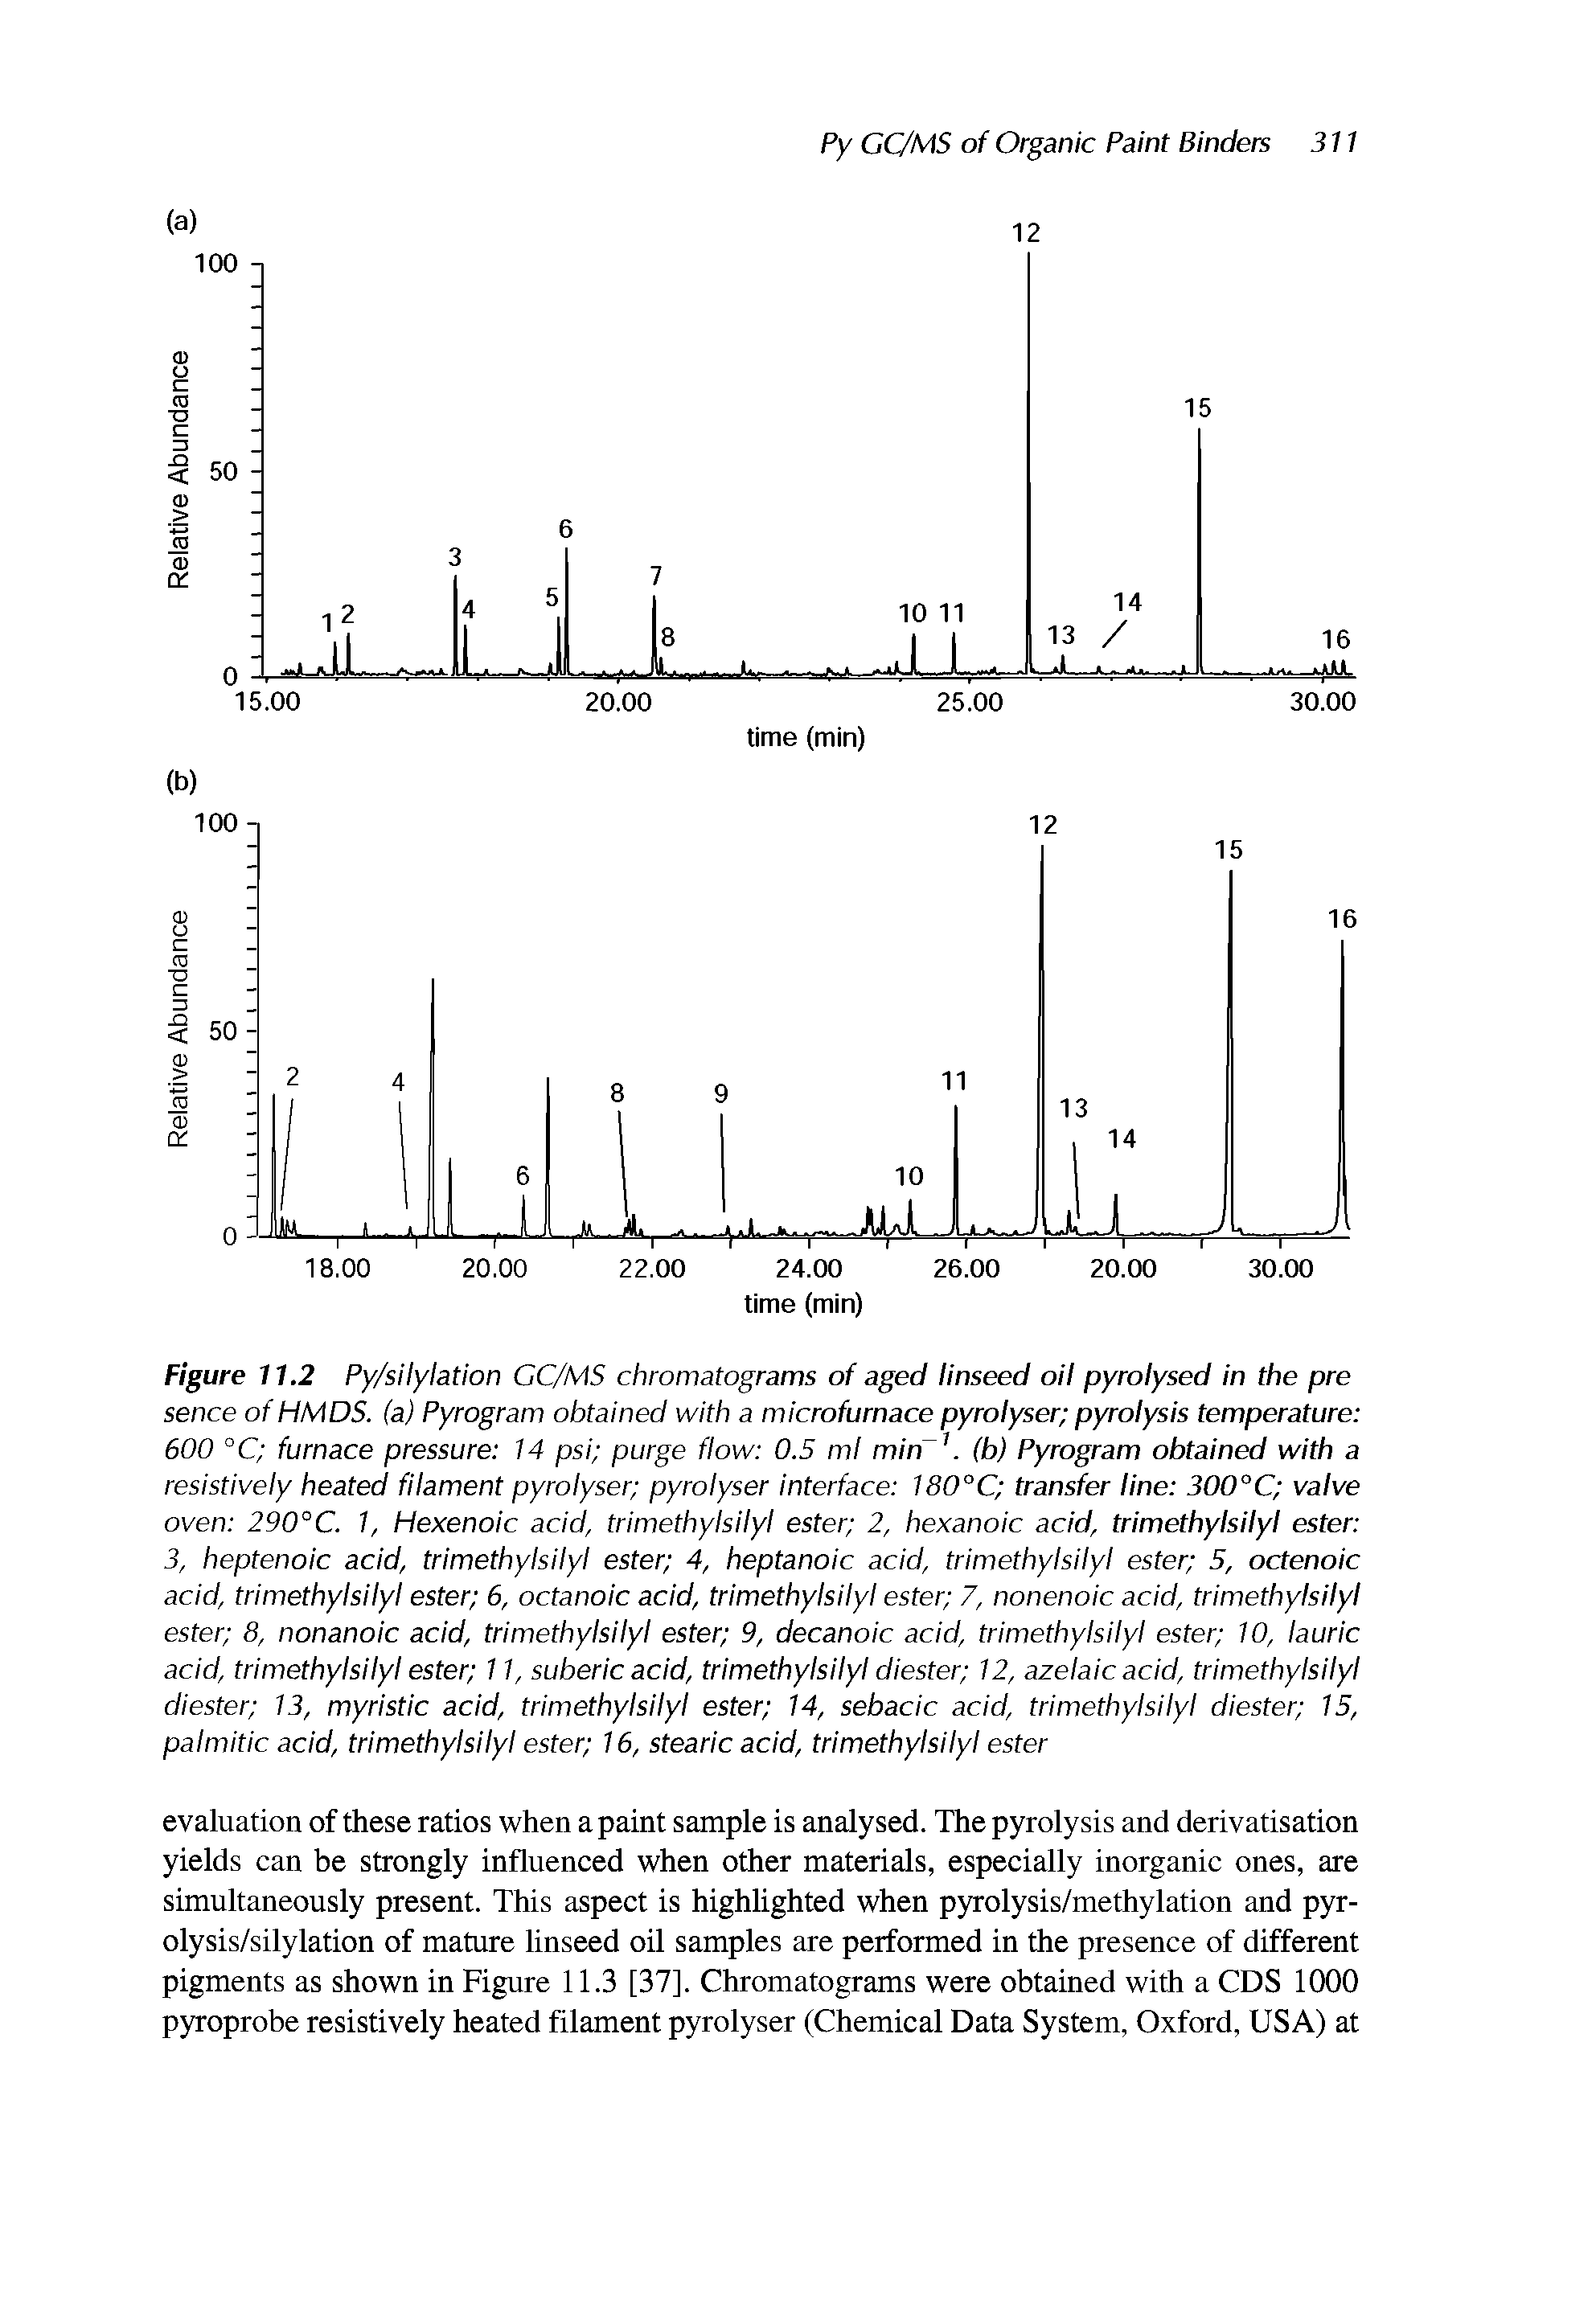 Figure 11.2 Py/silylation GC/MS chromatograms of aged linseed oil pyrolysed in the pre sence of HMDS, (a) Pyrogram obtained with a microfurnace pyrolyser pyrolysis temperature 600 °C furnace pressure 14 psi purge flow 0.5 ml min (b) Pyrogram obtained with a resistively heated filament pyrolyser pyrolyser interface I80°C transfer line 300°C valve oven 290°C. 1, Hexenoic acid, trimethylsilyl ester 2, hexanoic acid, trimethylsilyl ester 3, heptenoic acid, trimethylsilyl ester 4, heptanoic acid, trimethylsilyl ester 5, octenoic acid, trimethylsilyl ester 6, octanoic acid, trimethylsilyl ester 7, nonenoic acid, trimethylsilyl ester 8, nonanoic acid, trimethylsilyl ester 9, decanoic acid, trimethylsilyl ester 10, lauric acid, trimethylsilyl ester 11, suberic acid, trimethylsilyl diester 12, azelaic acid, trimethylsilyl diester 13, myristic acid, trimethylsilyl ester 14, sebacic acid, trimethylsilyl diester 15, palmitic acid, trimethylsilyl ester 16, stearic acid, trimethylsilyl ester...